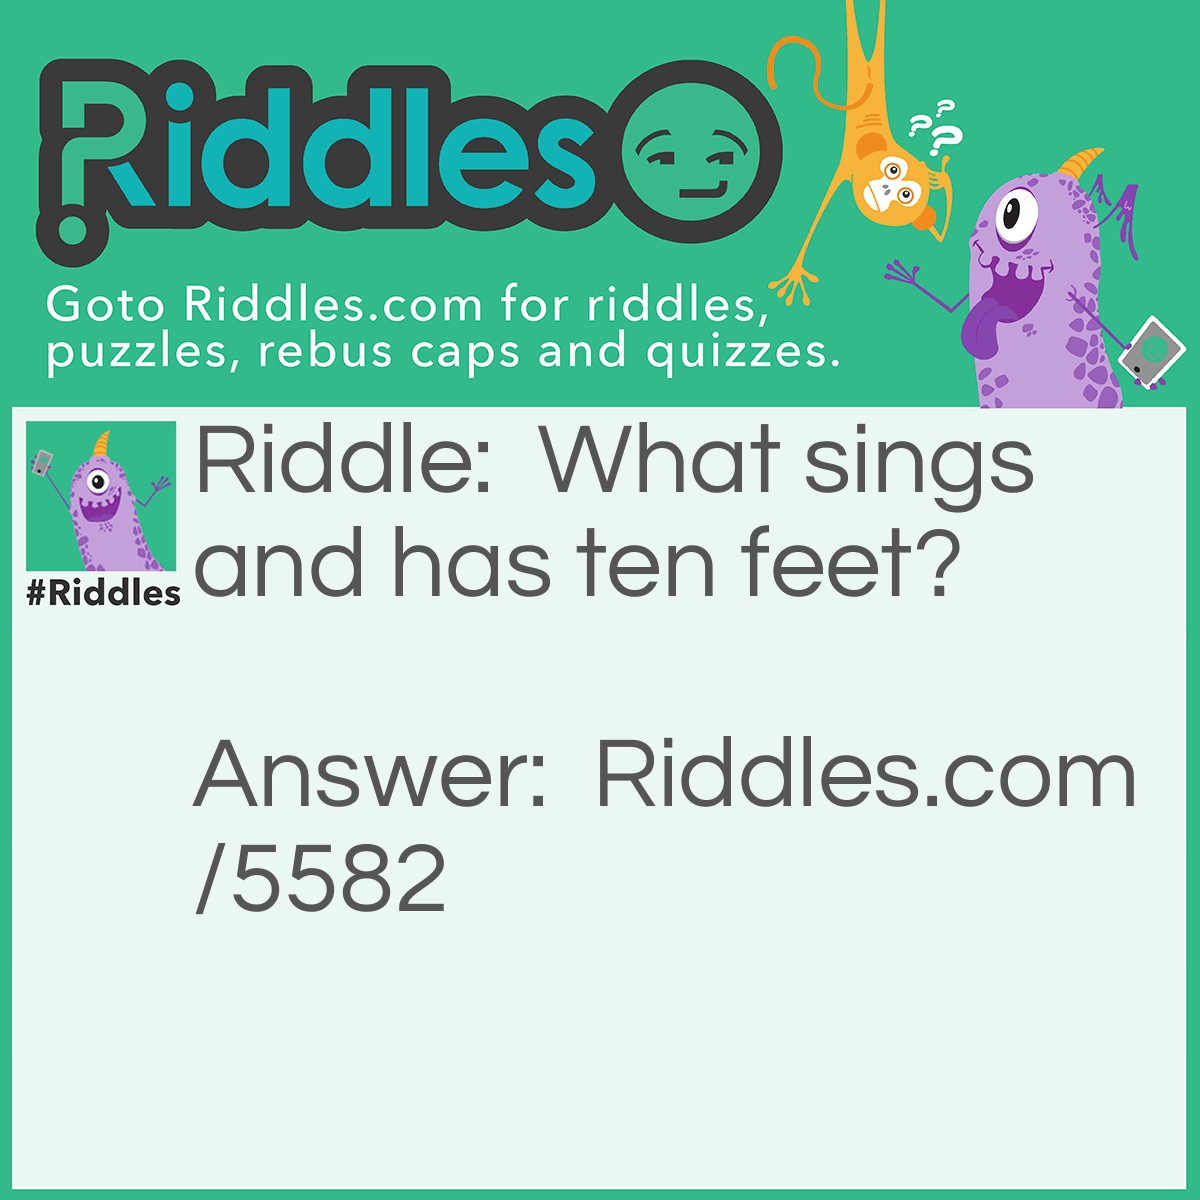 Riddle: What sings and has ten feet? Answer: A quintet.